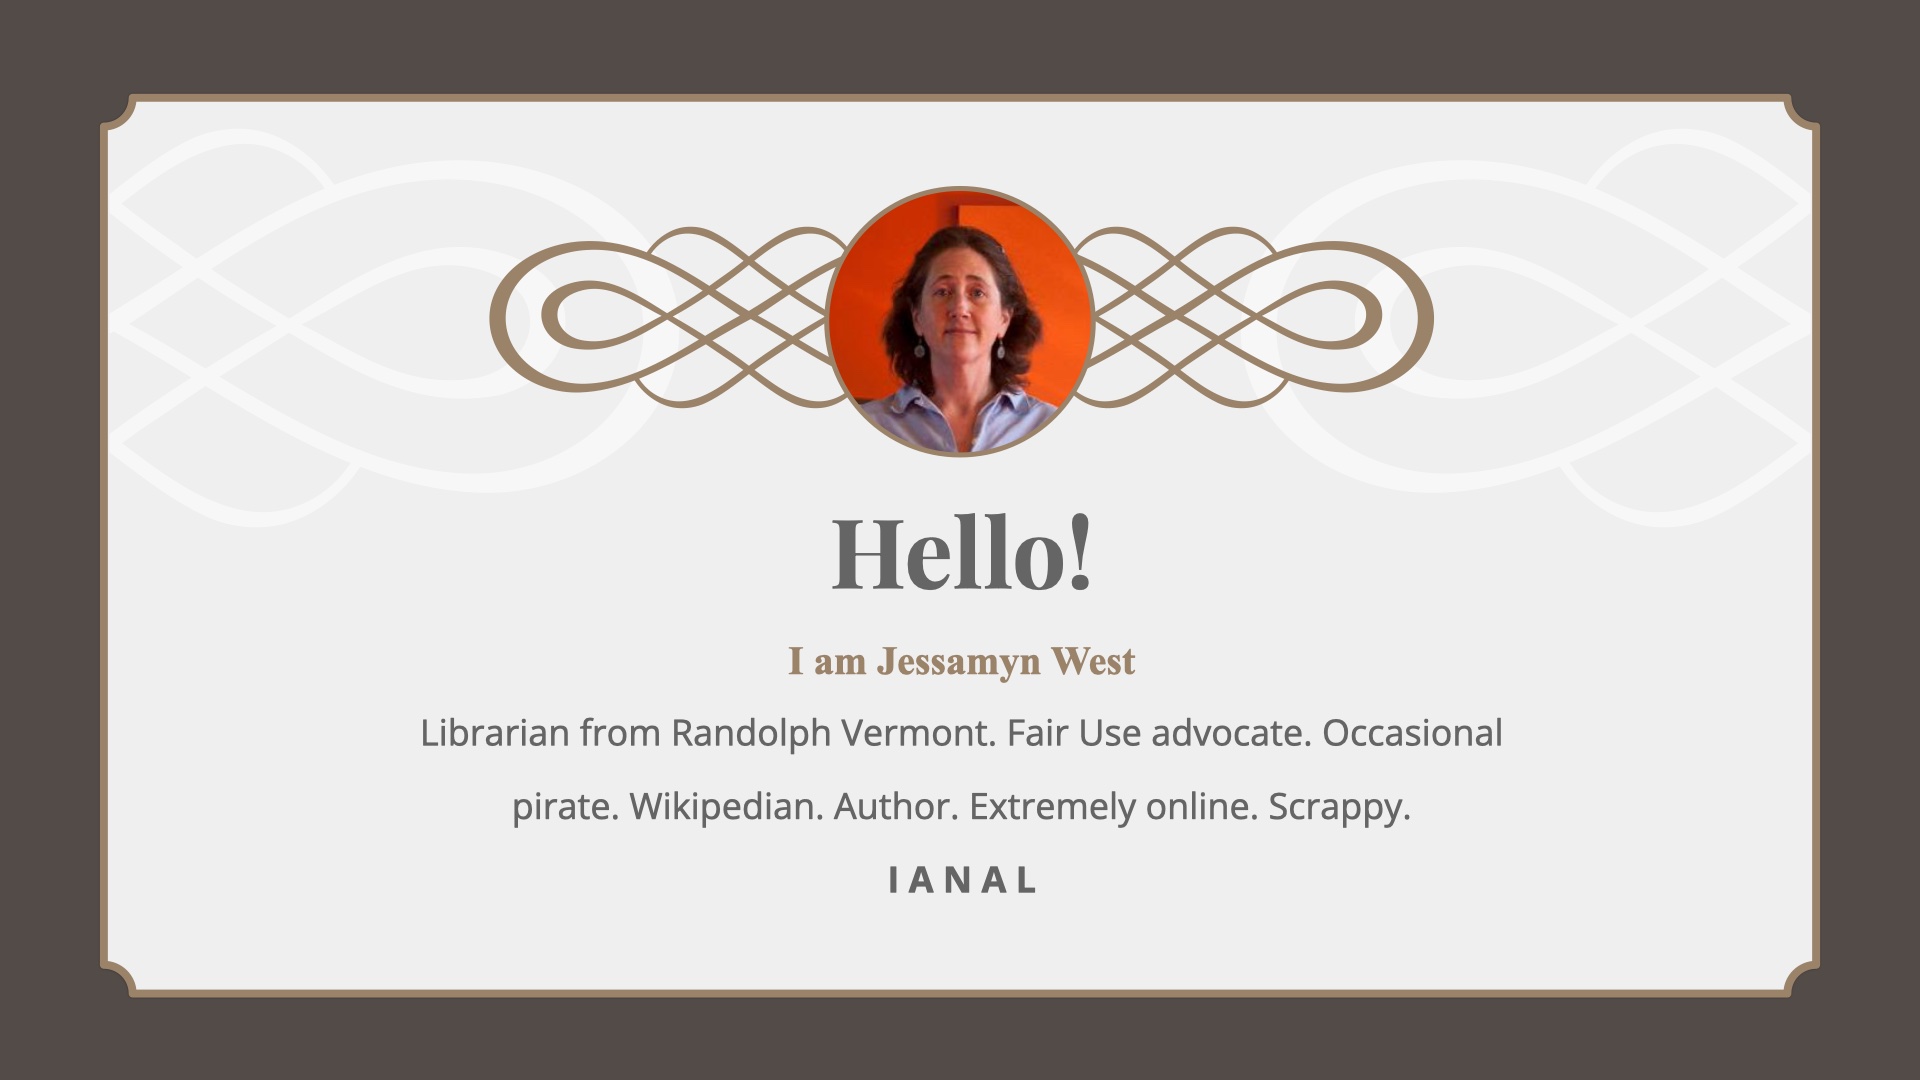 Small photo of me. Text: Hello, I am Jessamyn West, Librarian from Randolph, Fair Use Advocate. Occasional Pirate, Wikipedian. Author. Extremely Online. Scrappy.